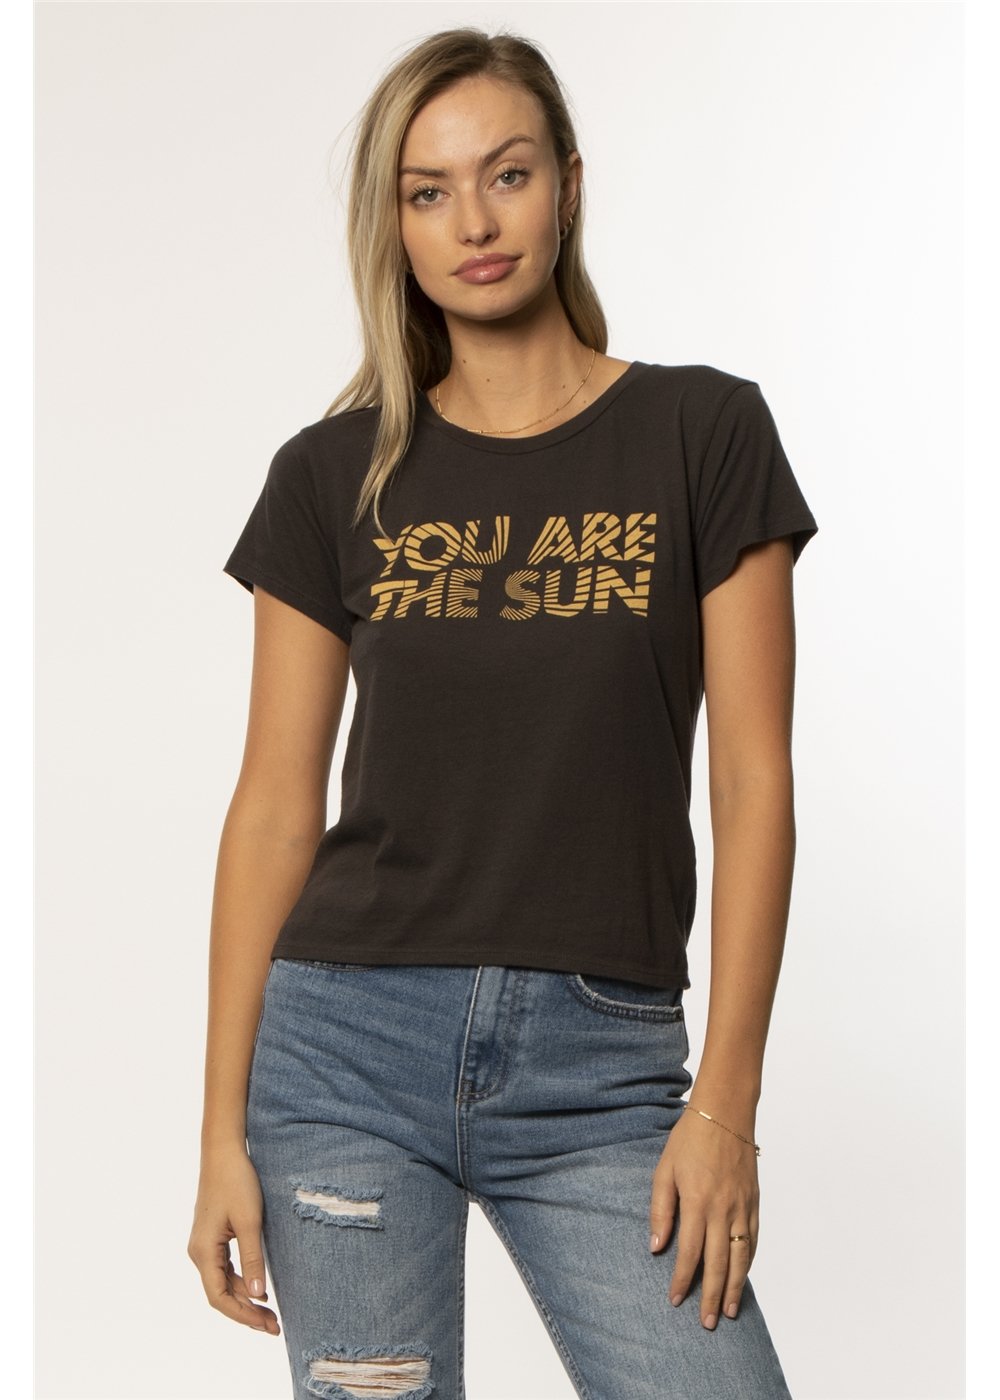 YOU ARE THE SUN KNIT TEE